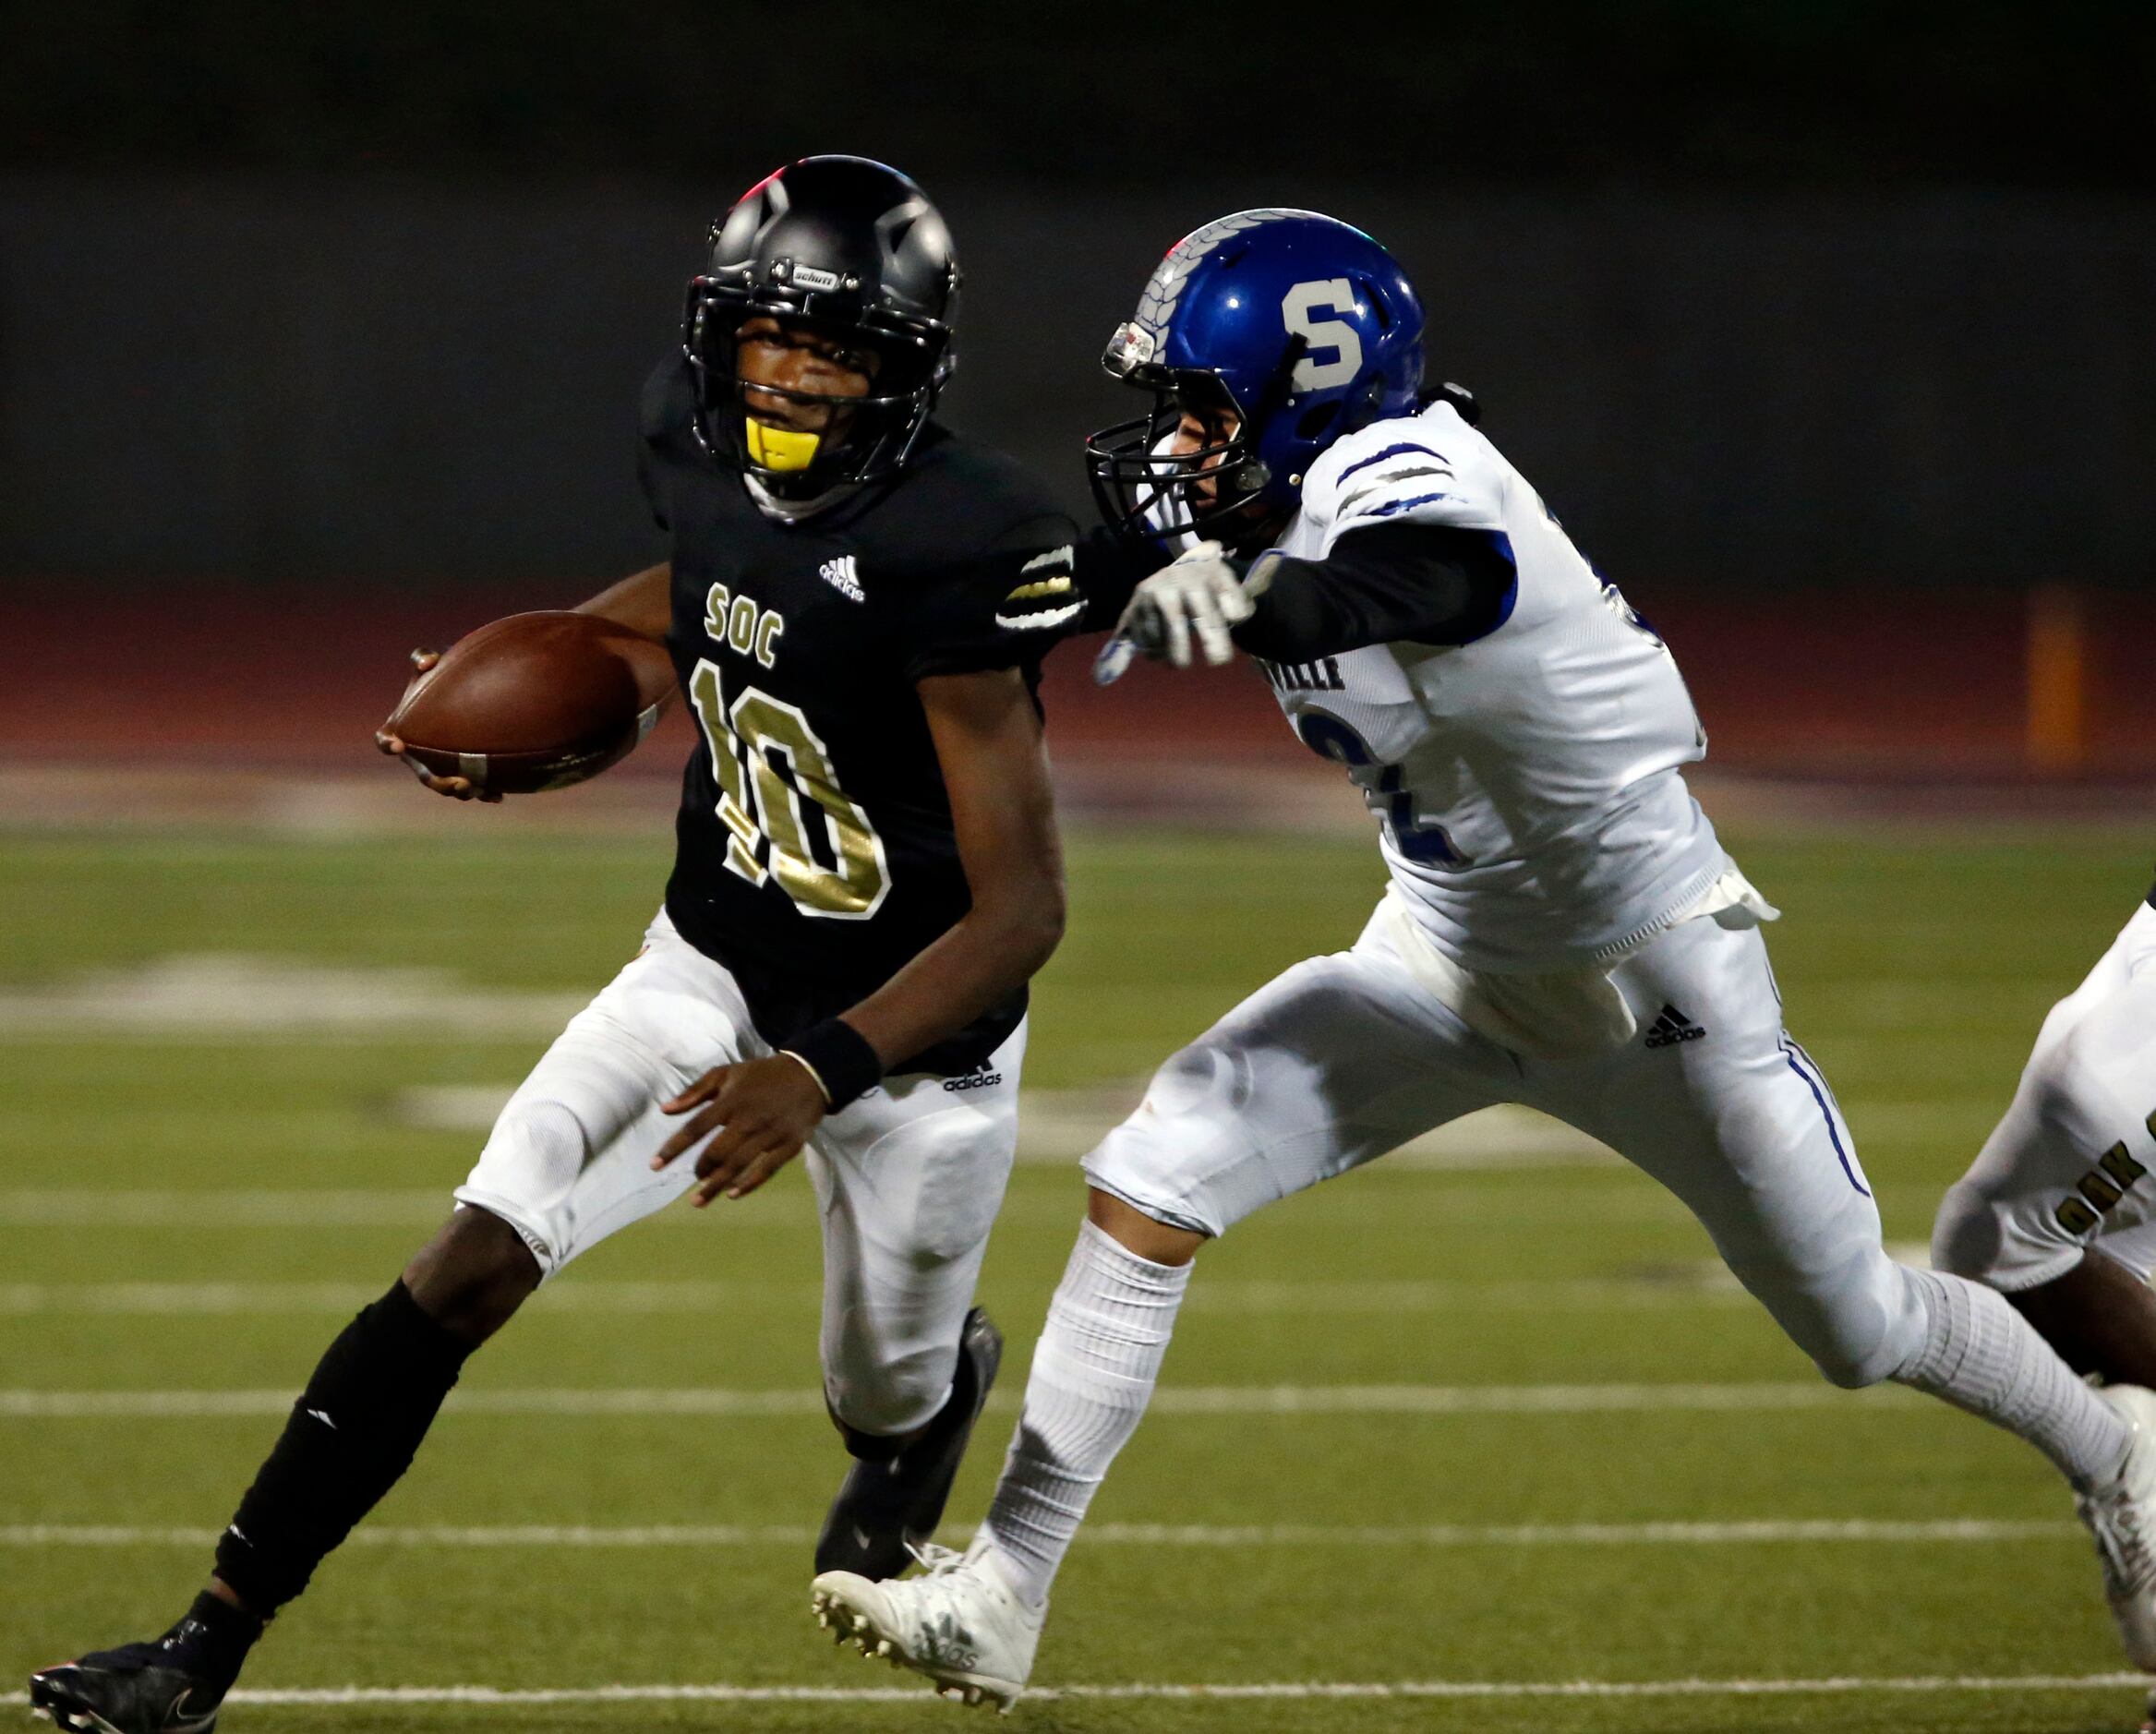 South Oak Cliff QB Kevin Henry-Jennings (10) scrambles away for a Seagoville High defender...